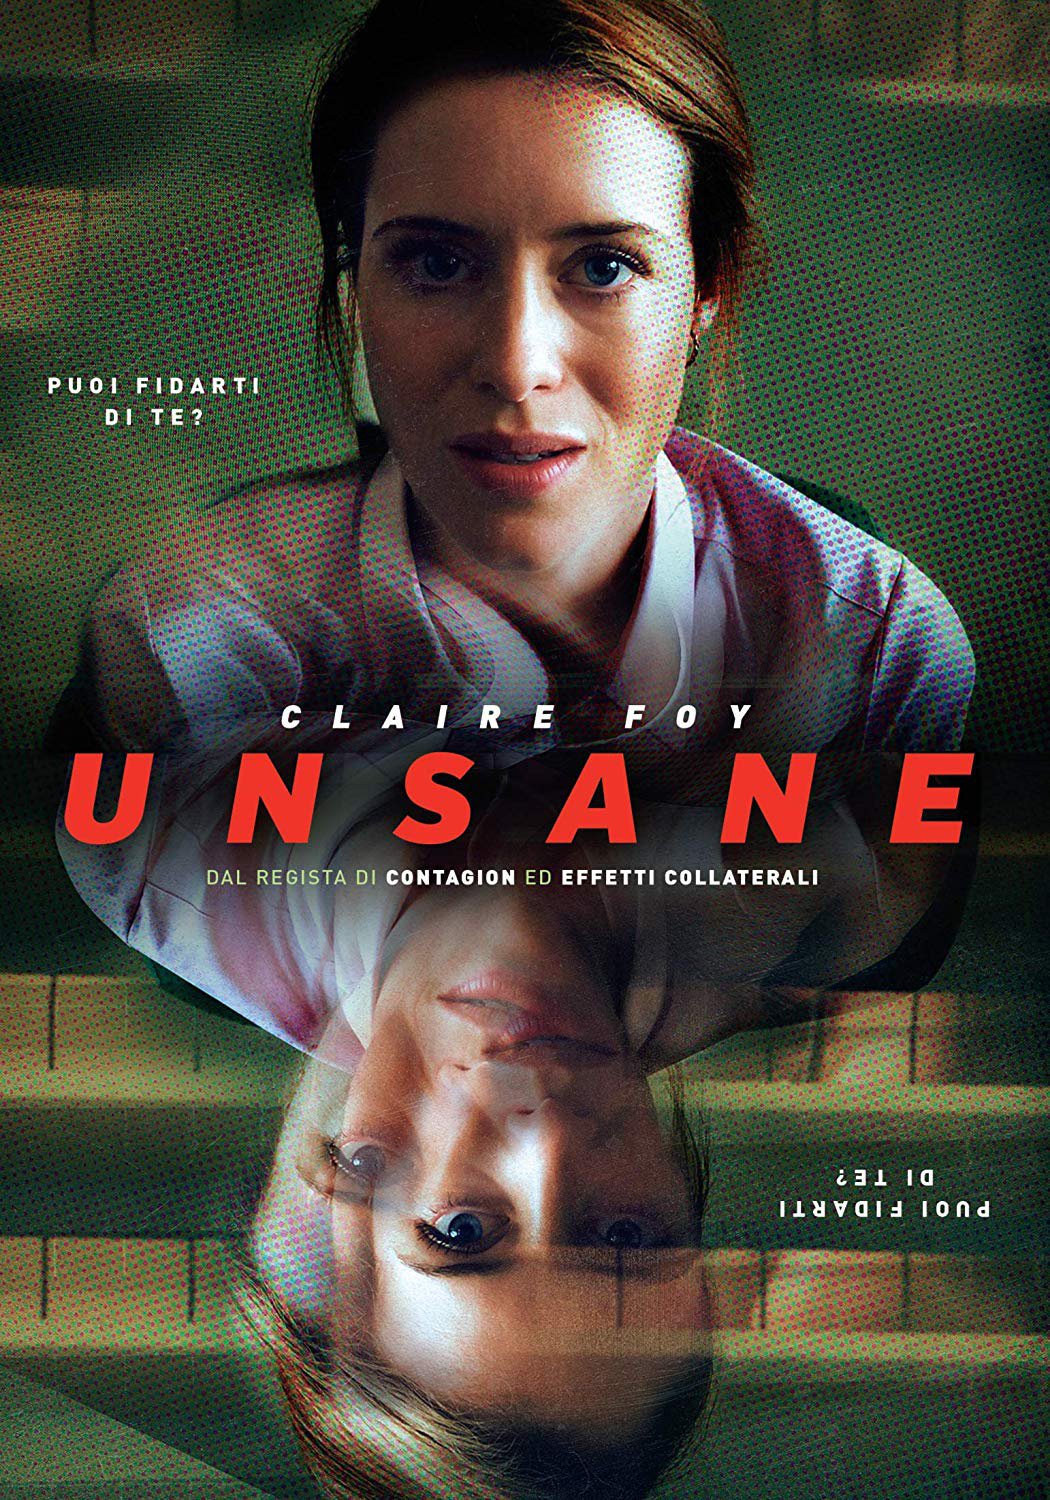 Unsane in DVD